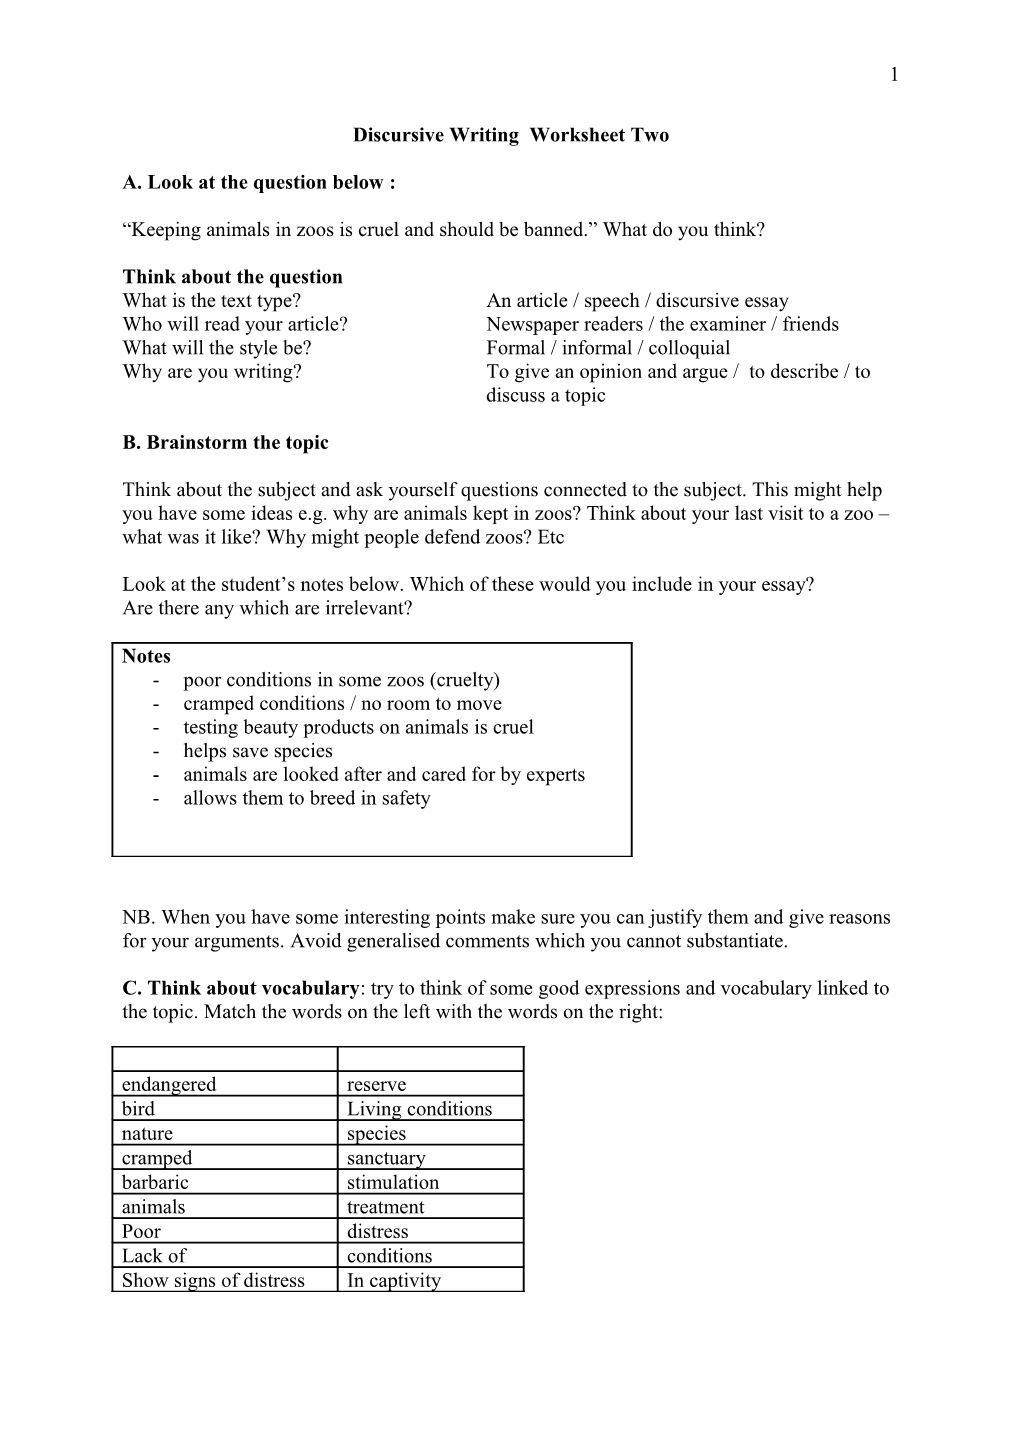 Writing an Article Worksheet Two